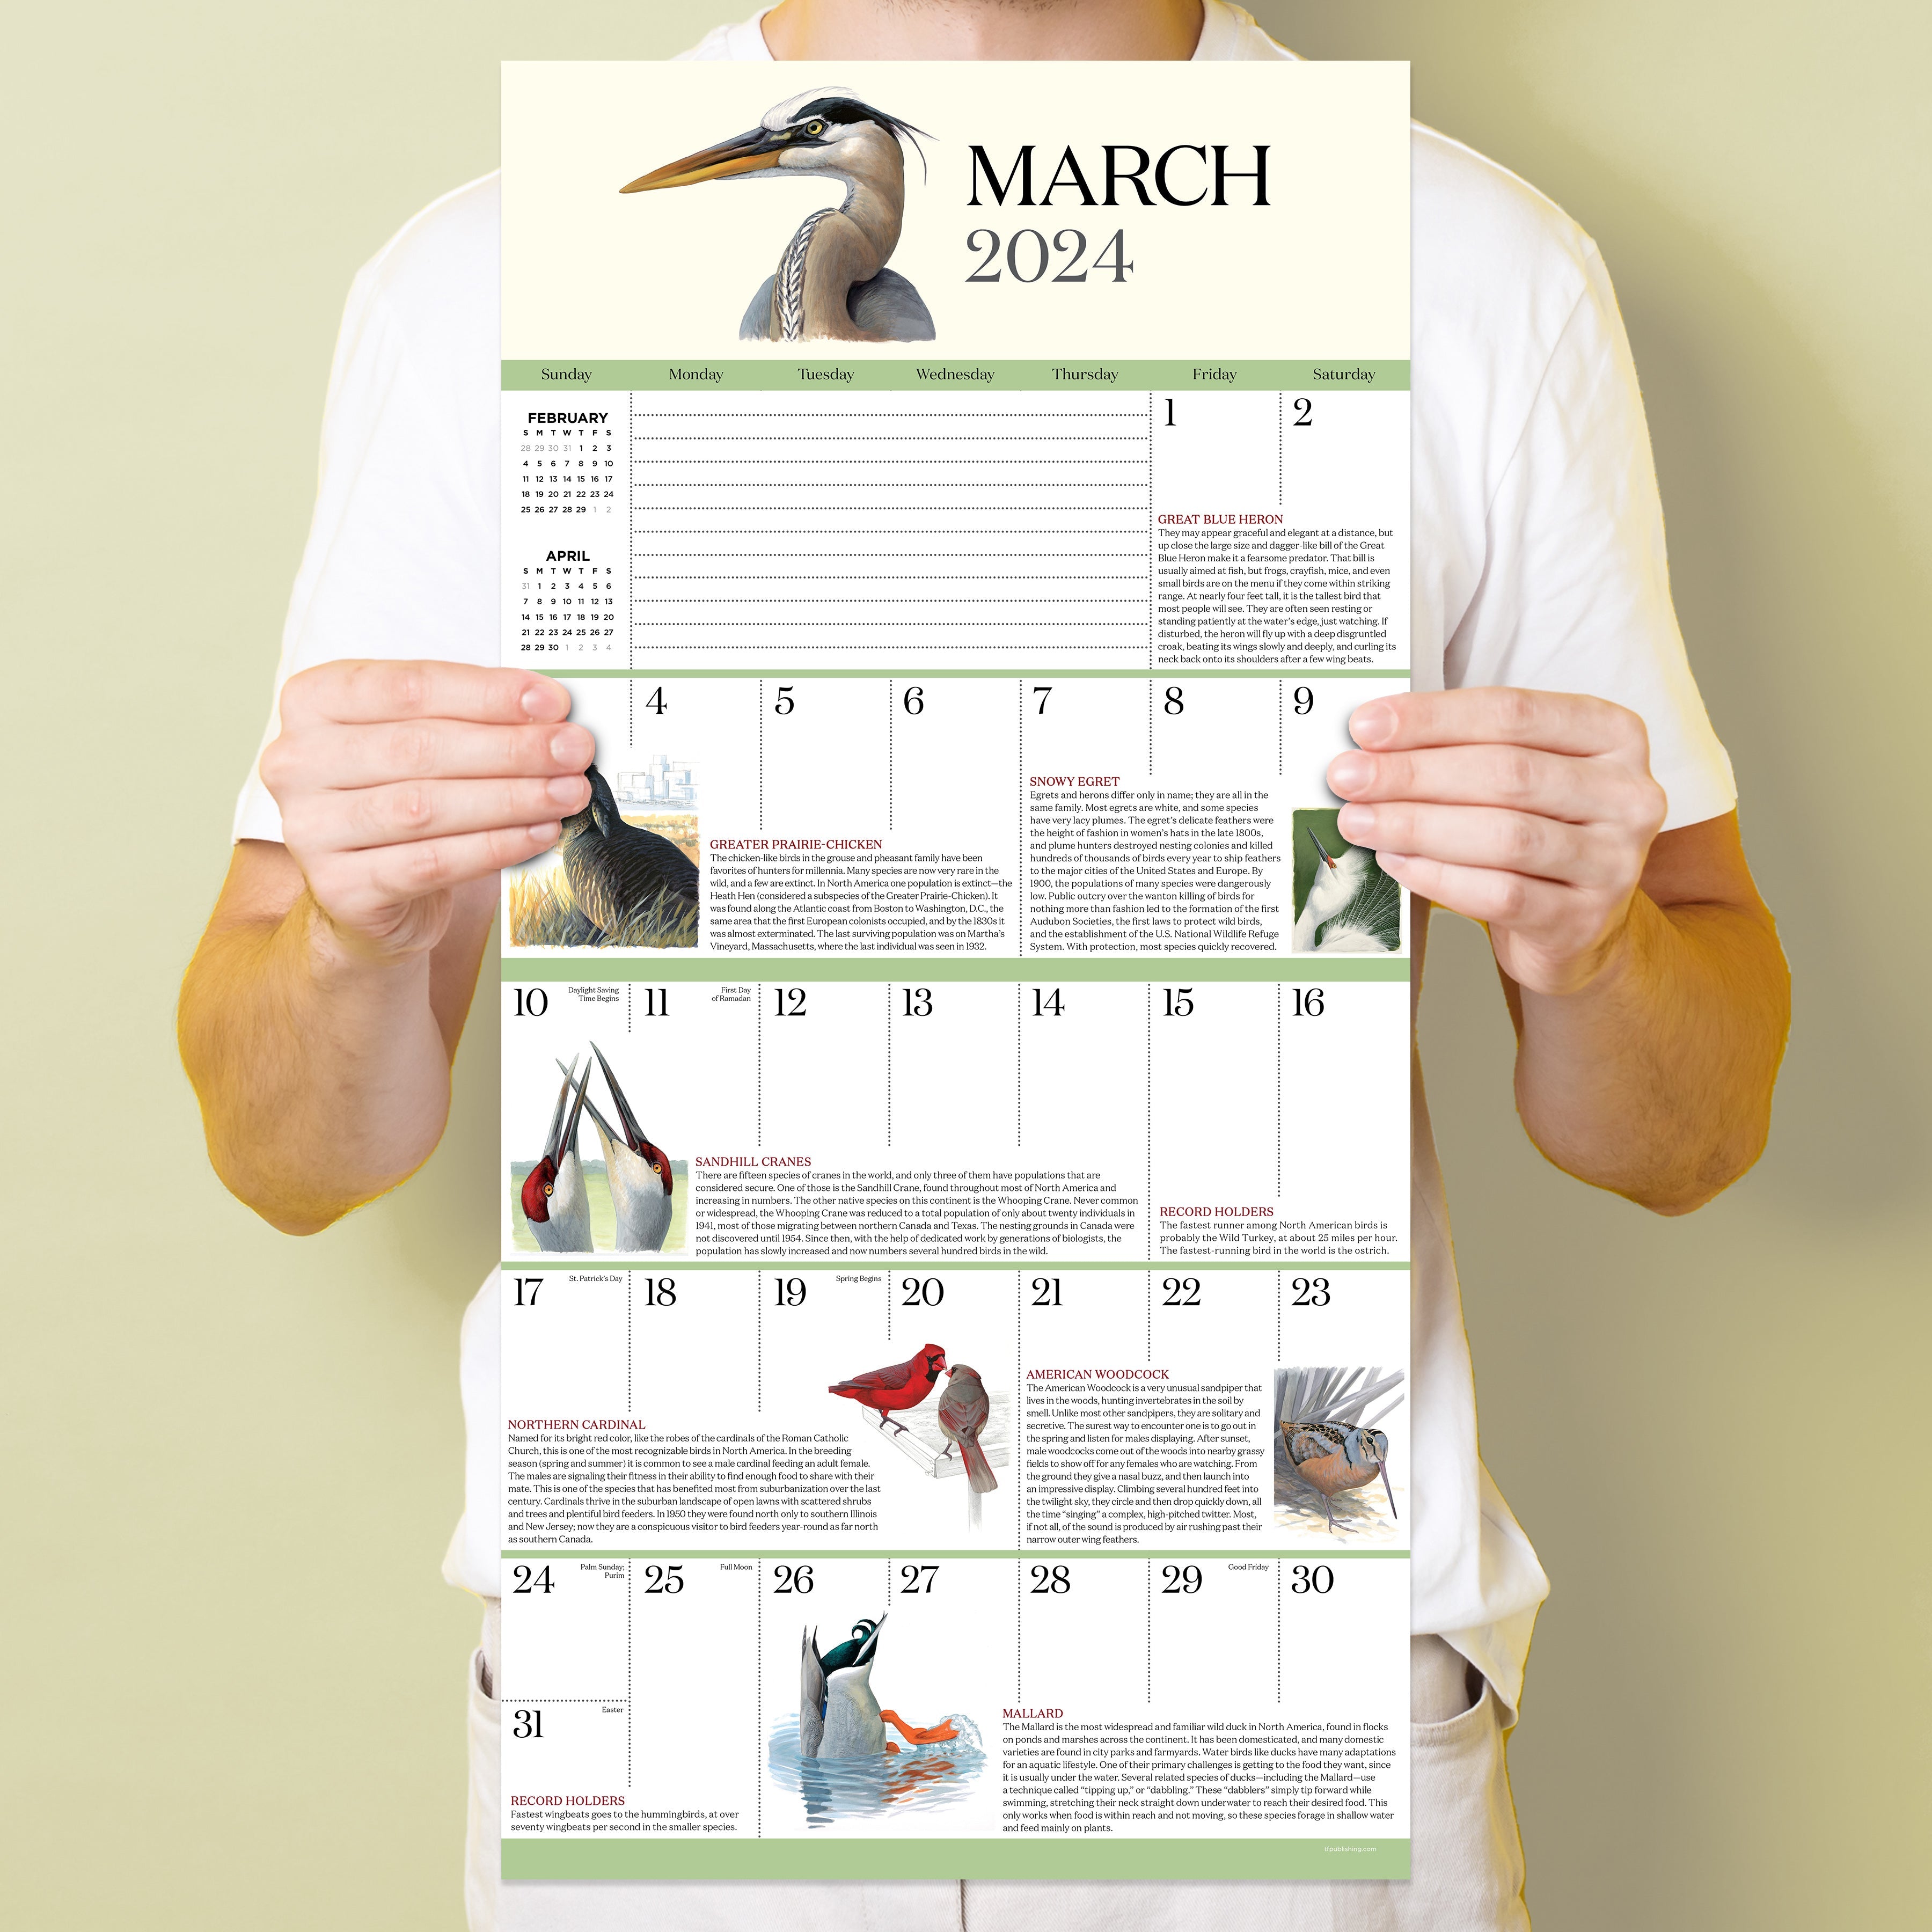 2024 What It's Like To Be A Bird - Square Wall Calendar